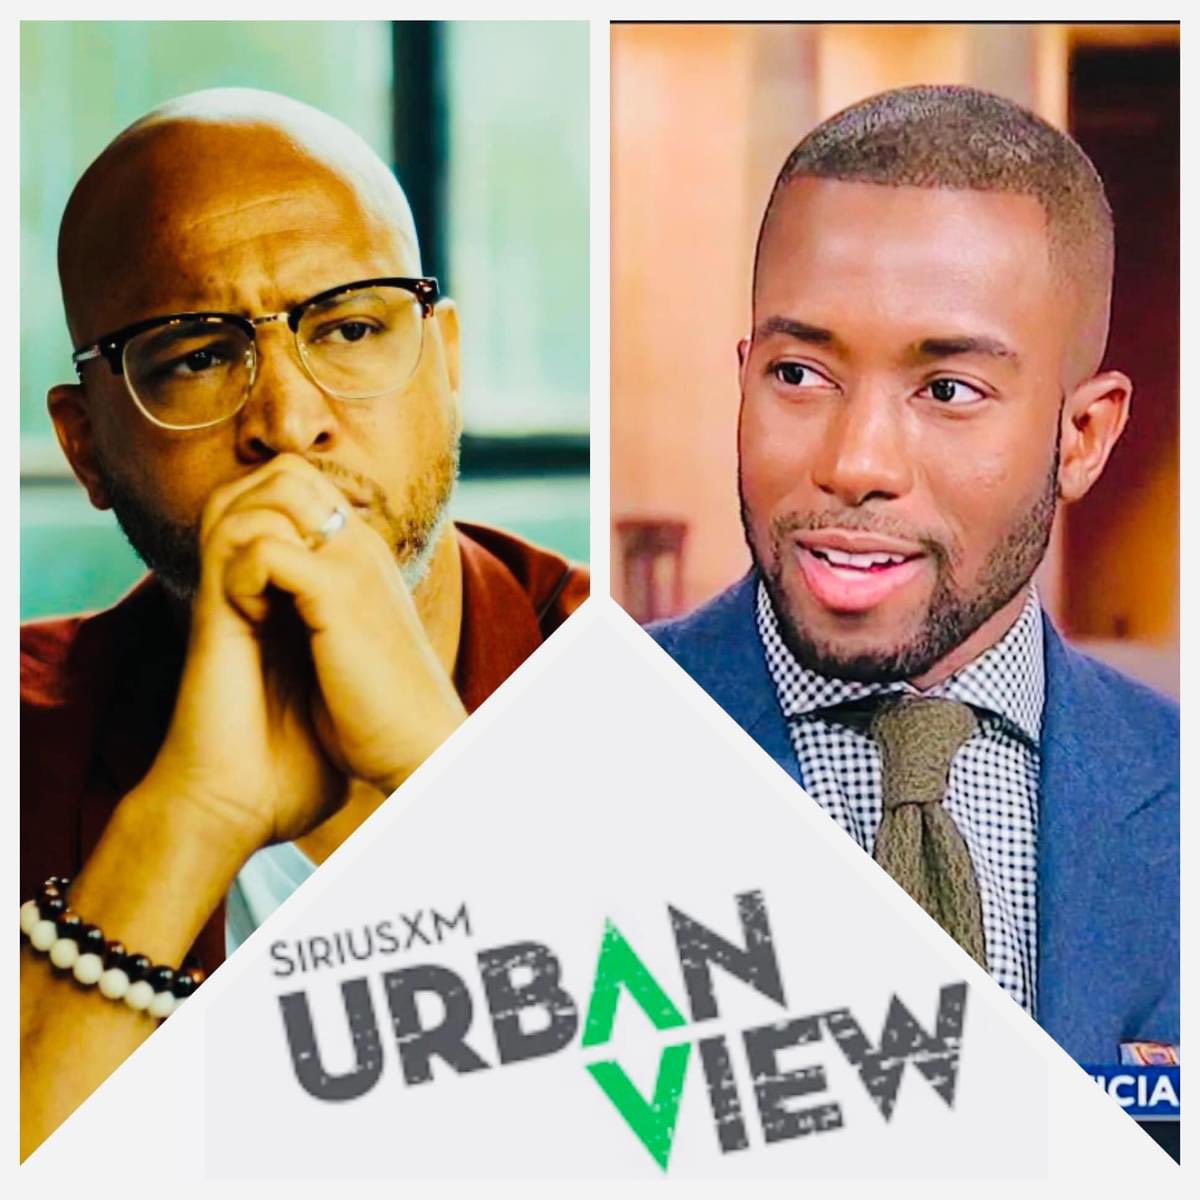 JOIN US!!!! Honored to join my Brother Shermichael Singleton’s Show this Saturday at 2pm on SiriusXM (Ch. 126). 🎧 Join us to talk Student Demonstrations, 2024 presidential campaign, and Future of Education! 🚀📚 See you there! #RealMenTeach💯 @MrShermichael @UrbanViewRadio